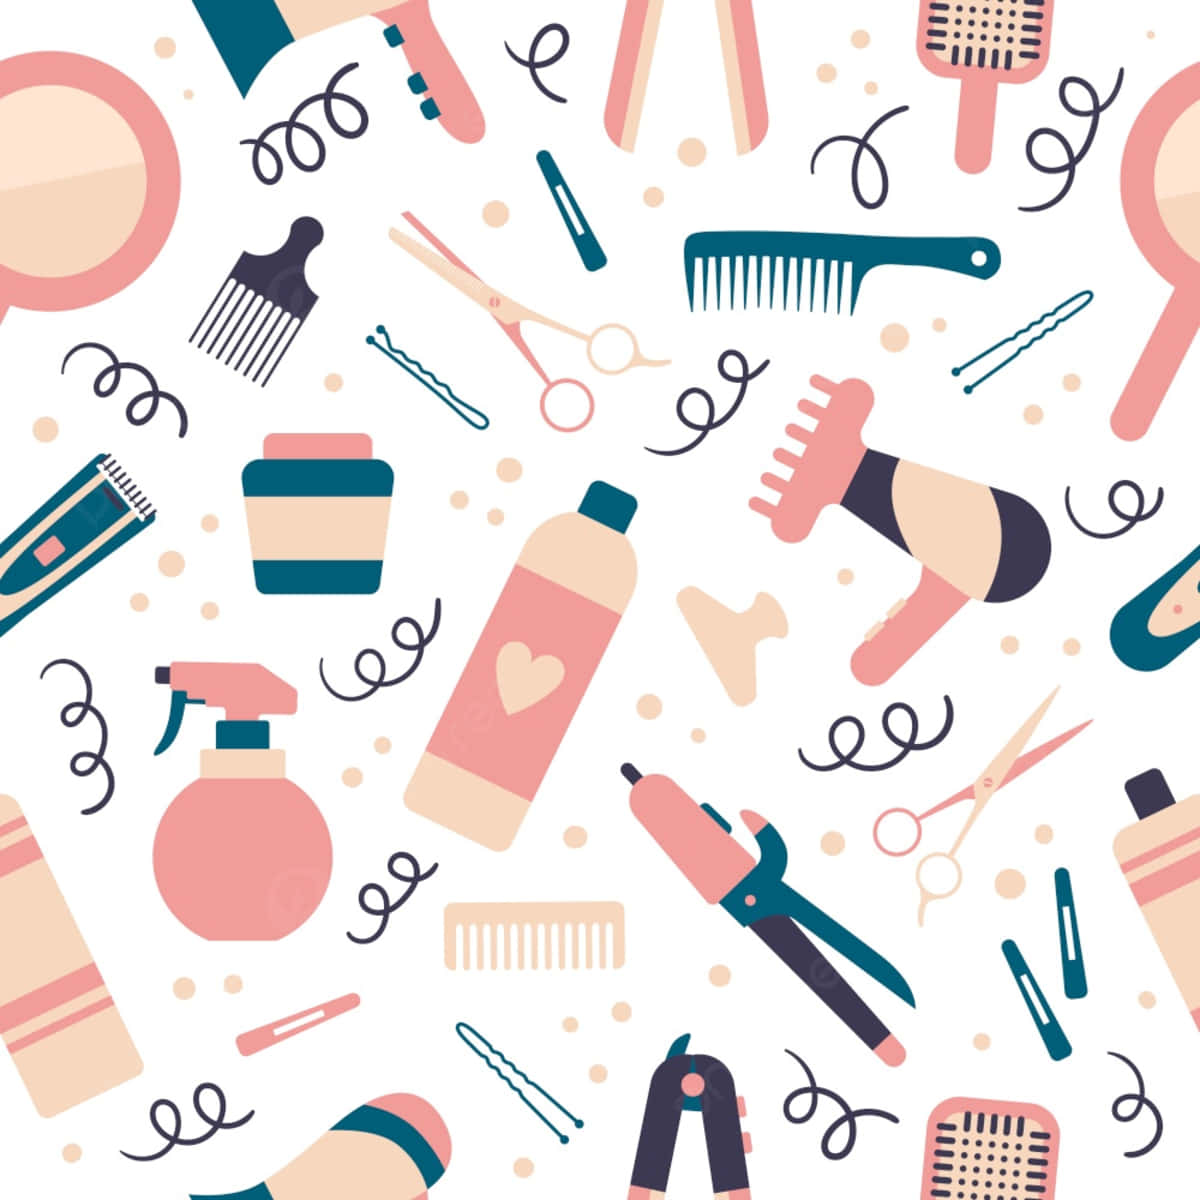 A Seamless Pattern Of Hair Care Items